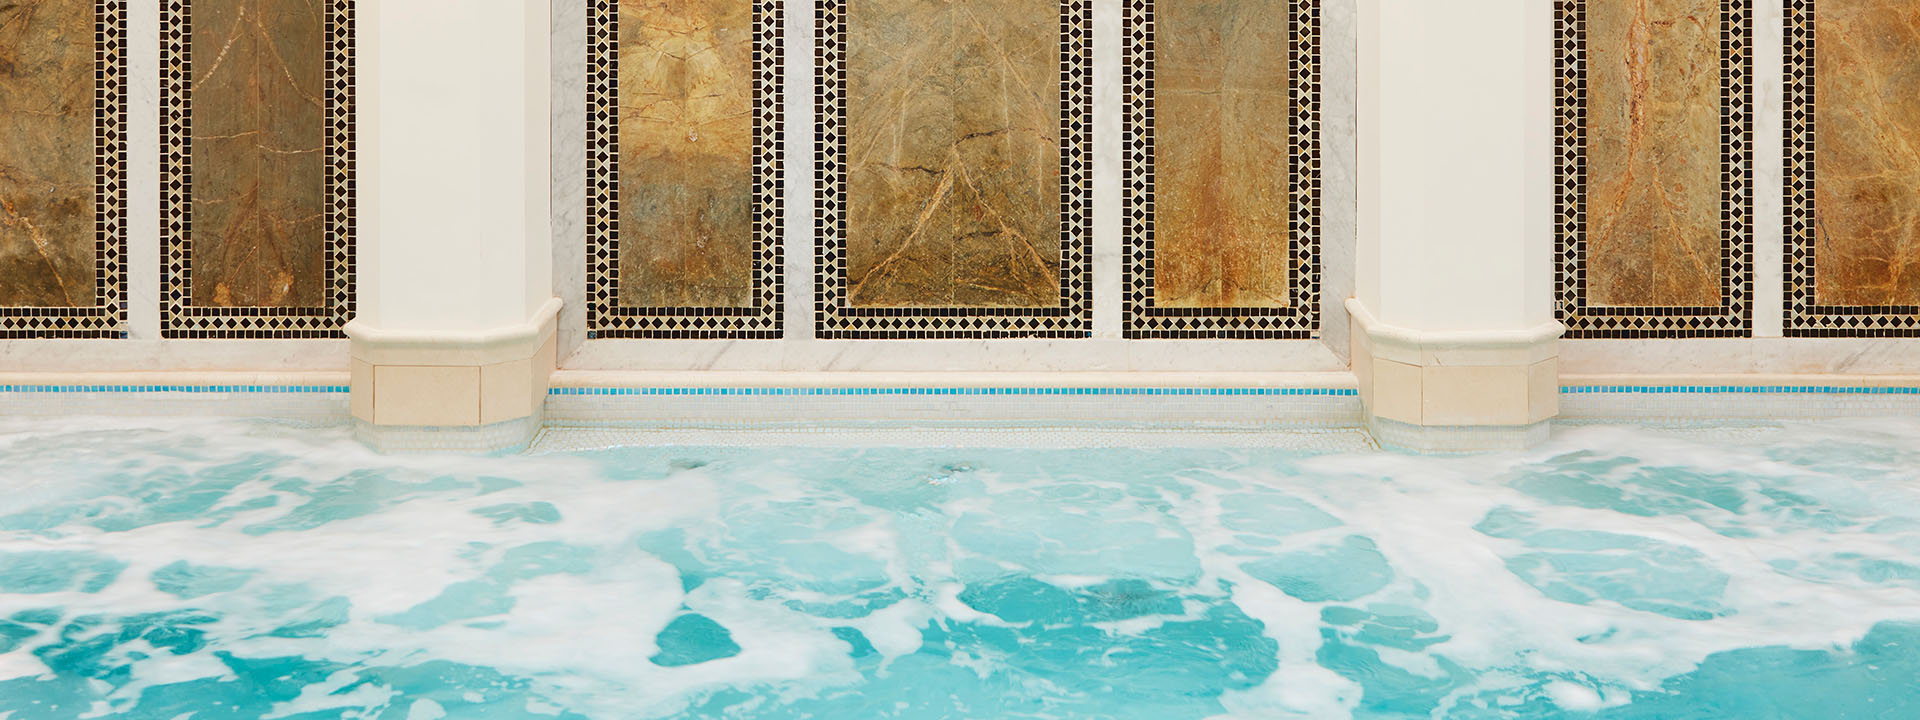 A large mineral pool at a spa with mosaic walls.